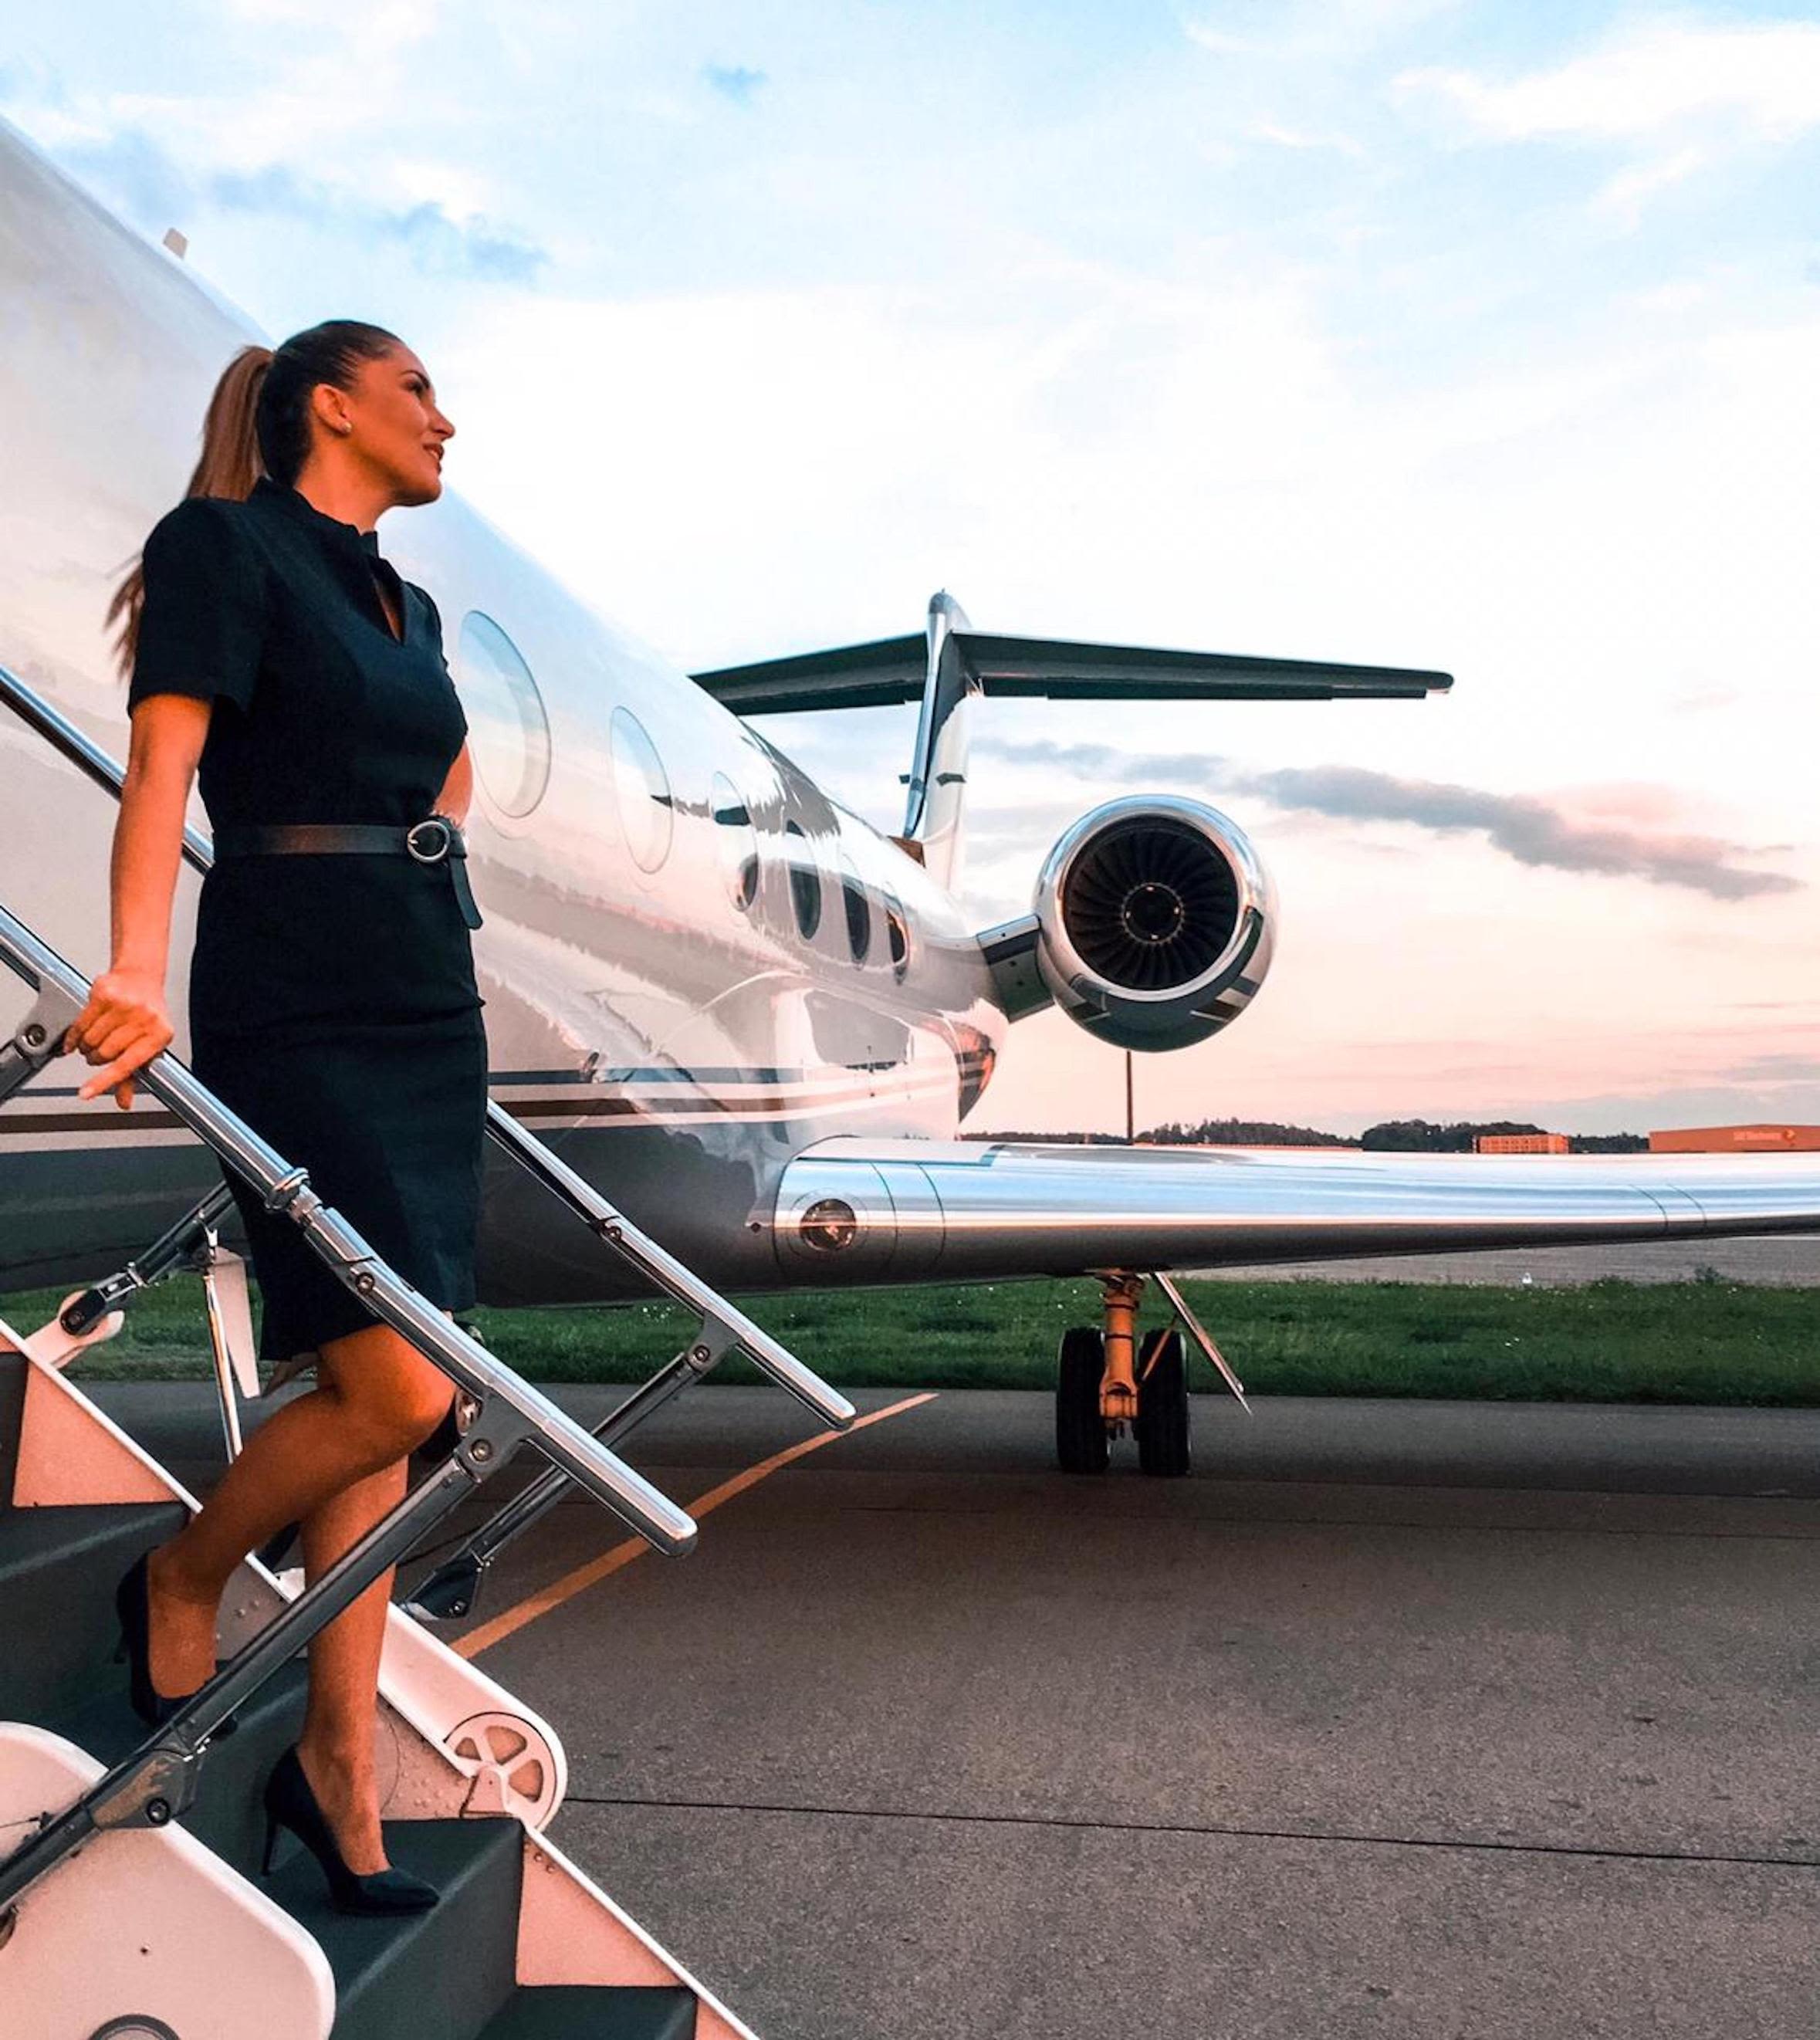 For the rich and famous, private jets are no longer private enough